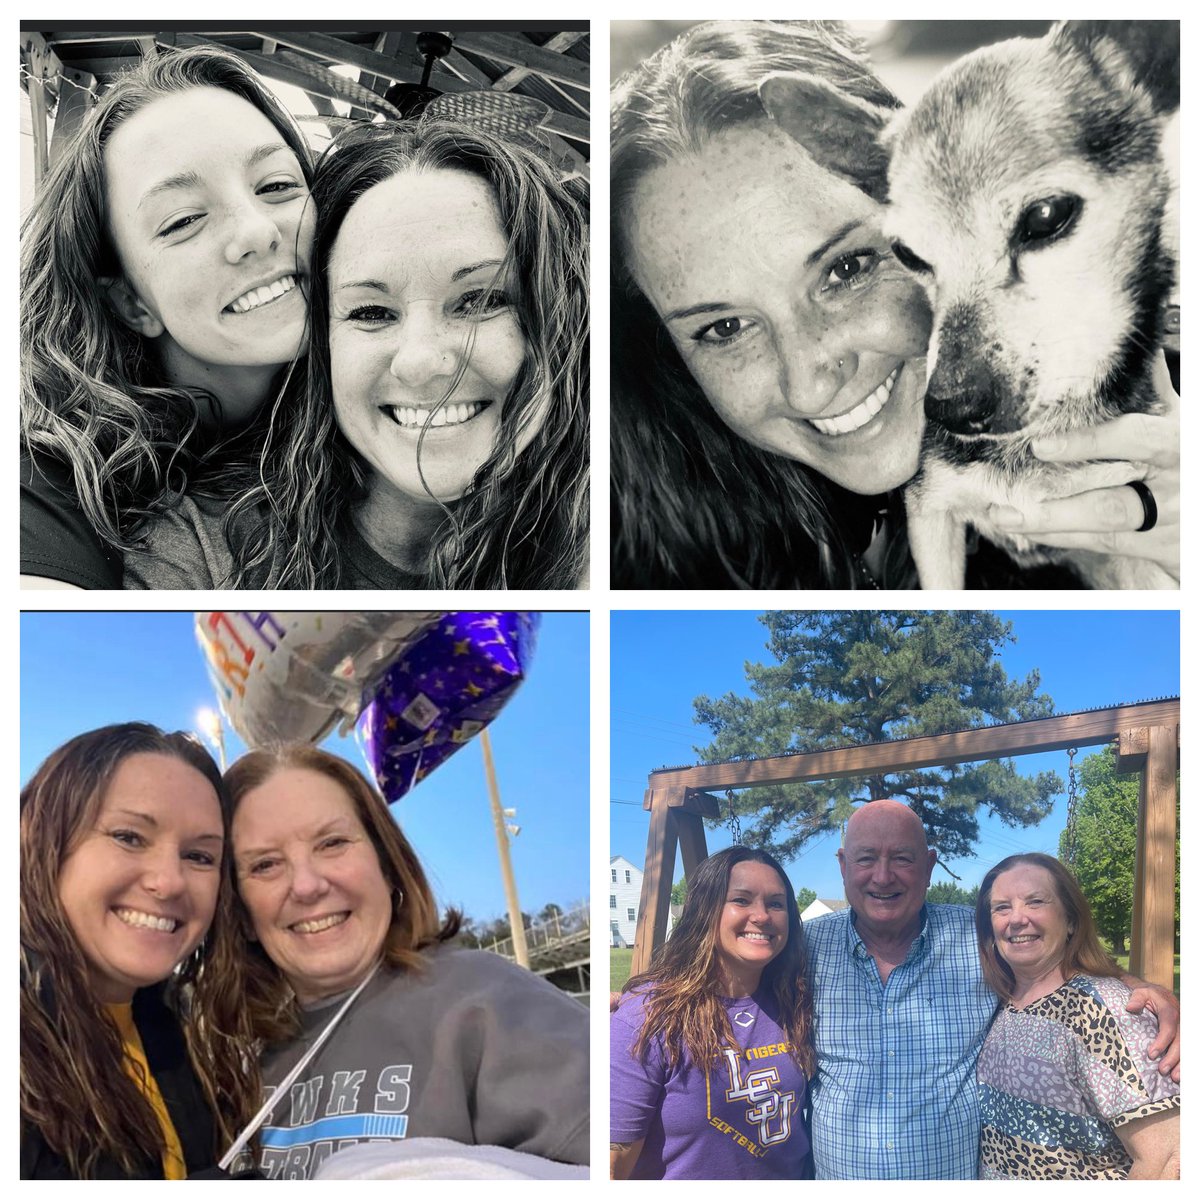 @crystalbyars33 
Happy National Daughters Day! We love you to the moon and back 💜💜♾️